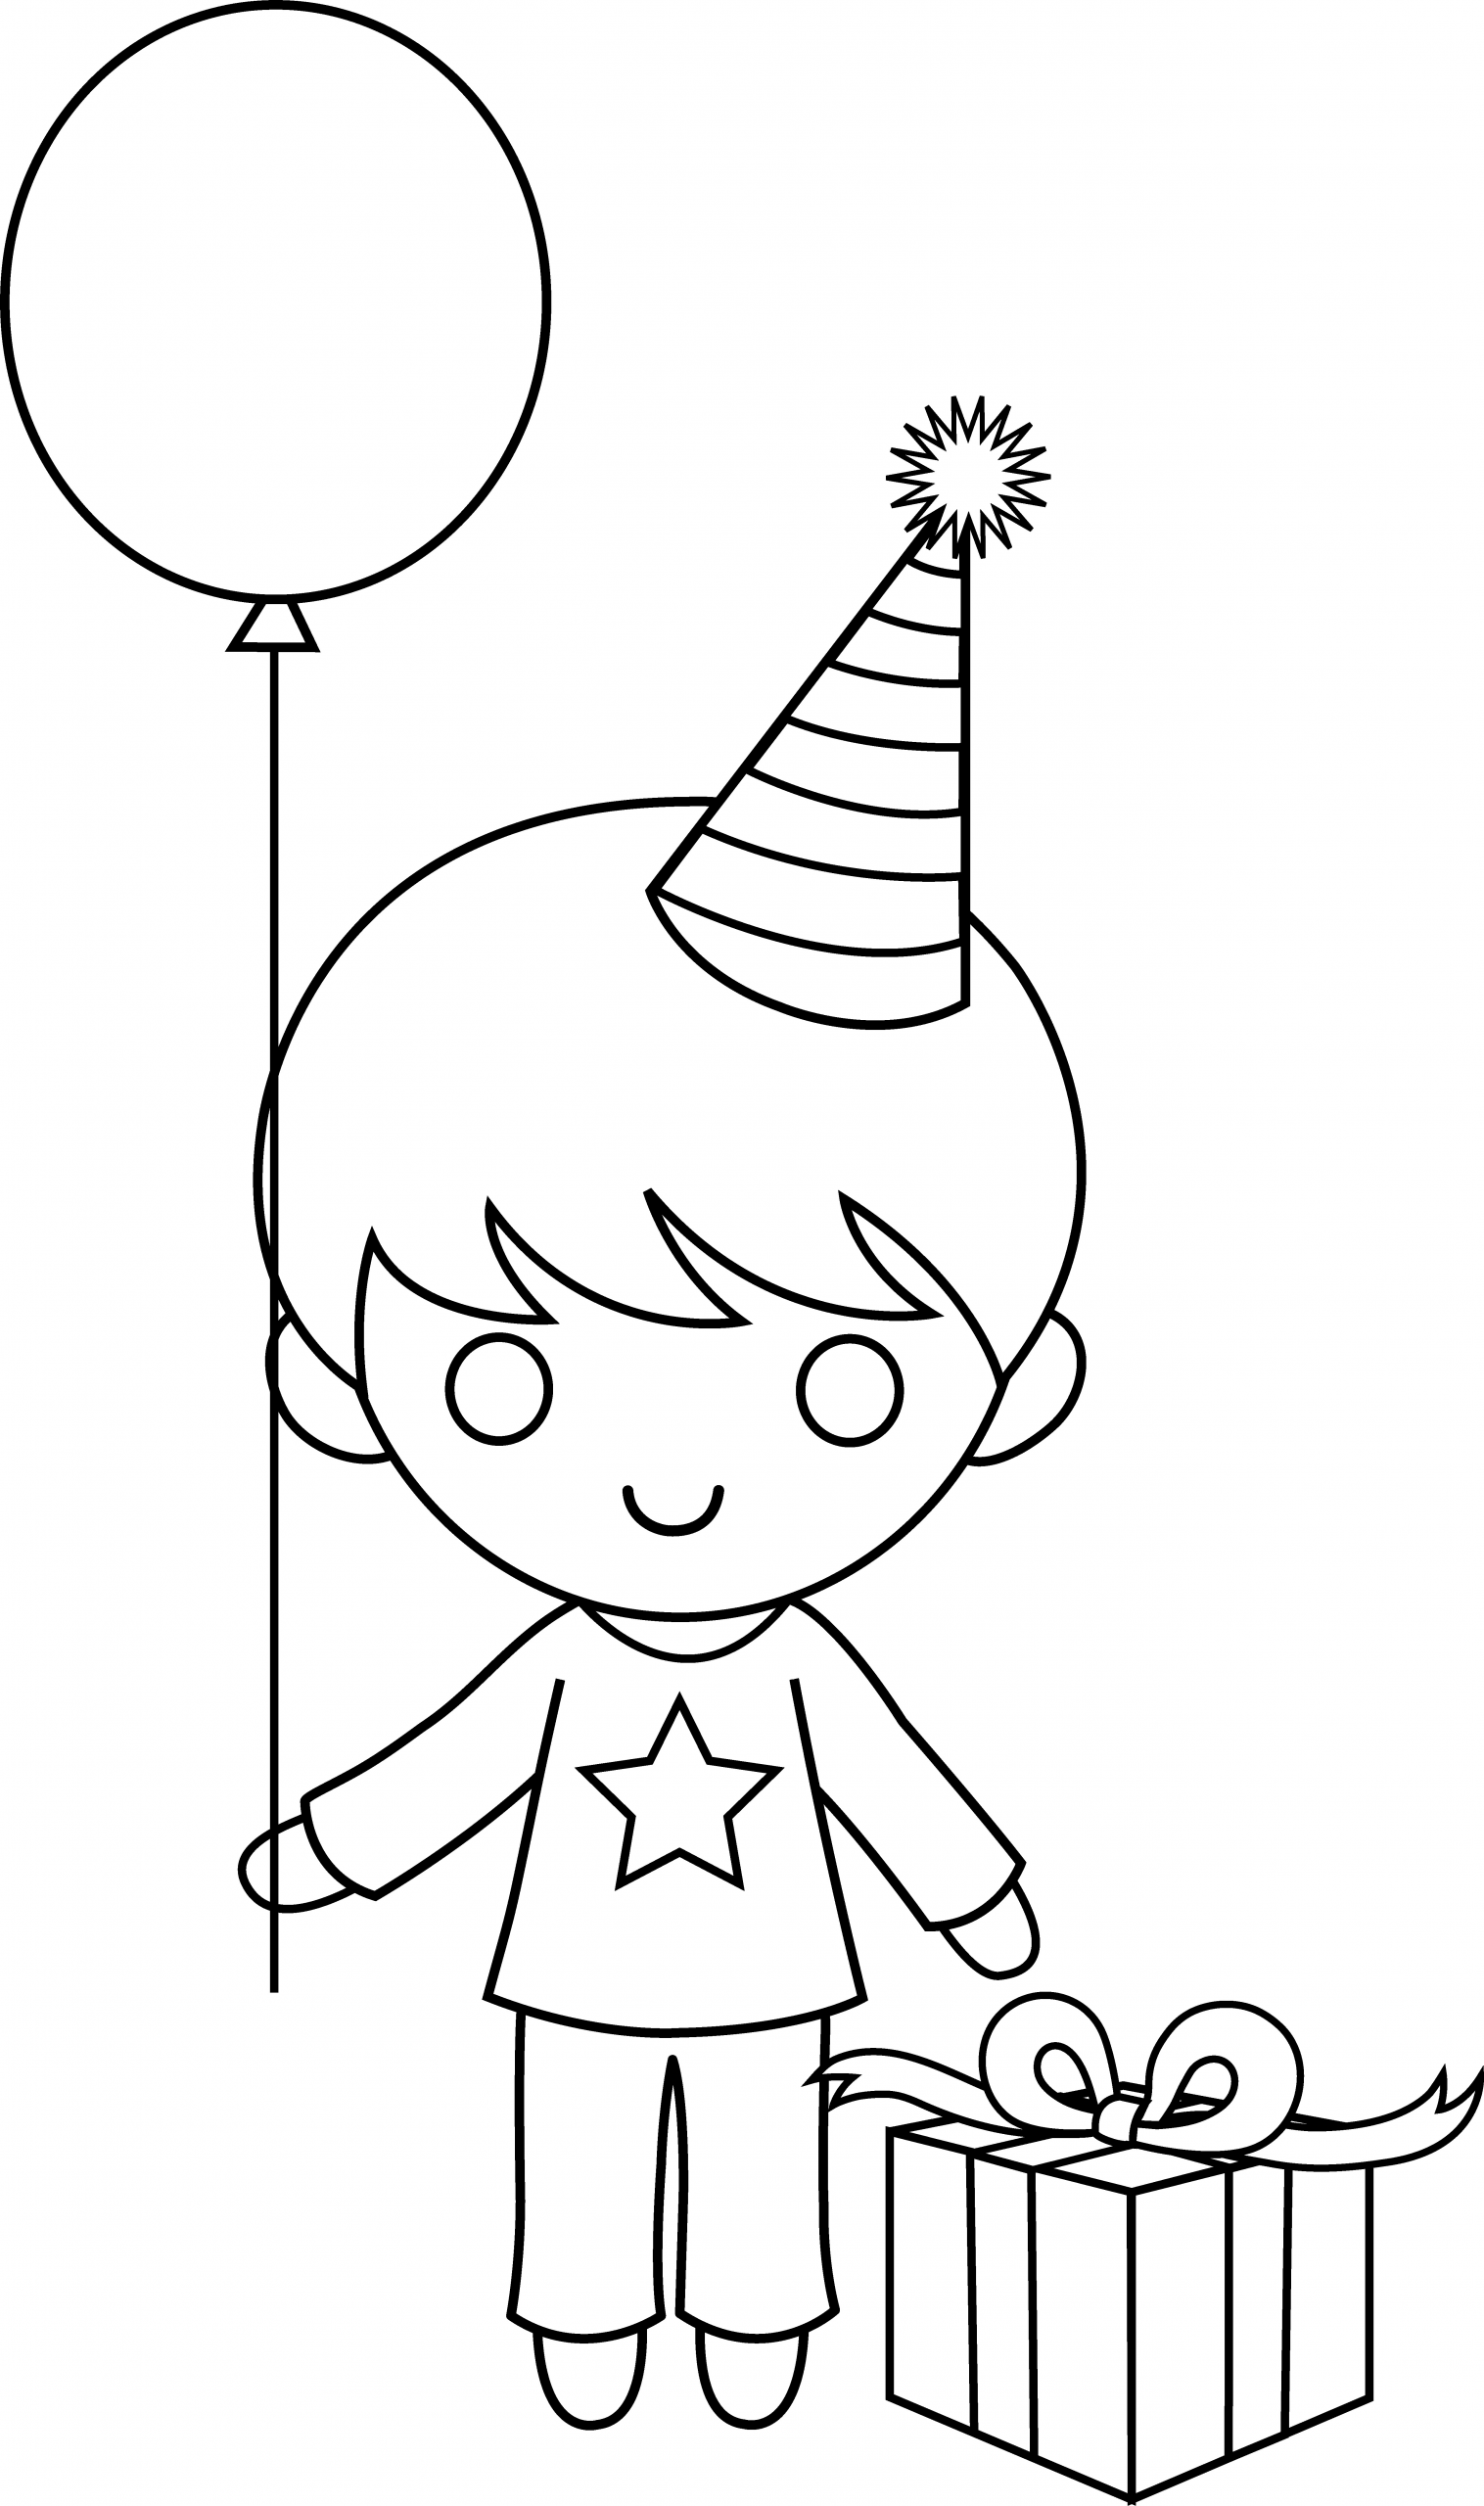 Happy Birthday Coloring Pages For Boys
 Birthday Boy Coloring Page Free Clip Art